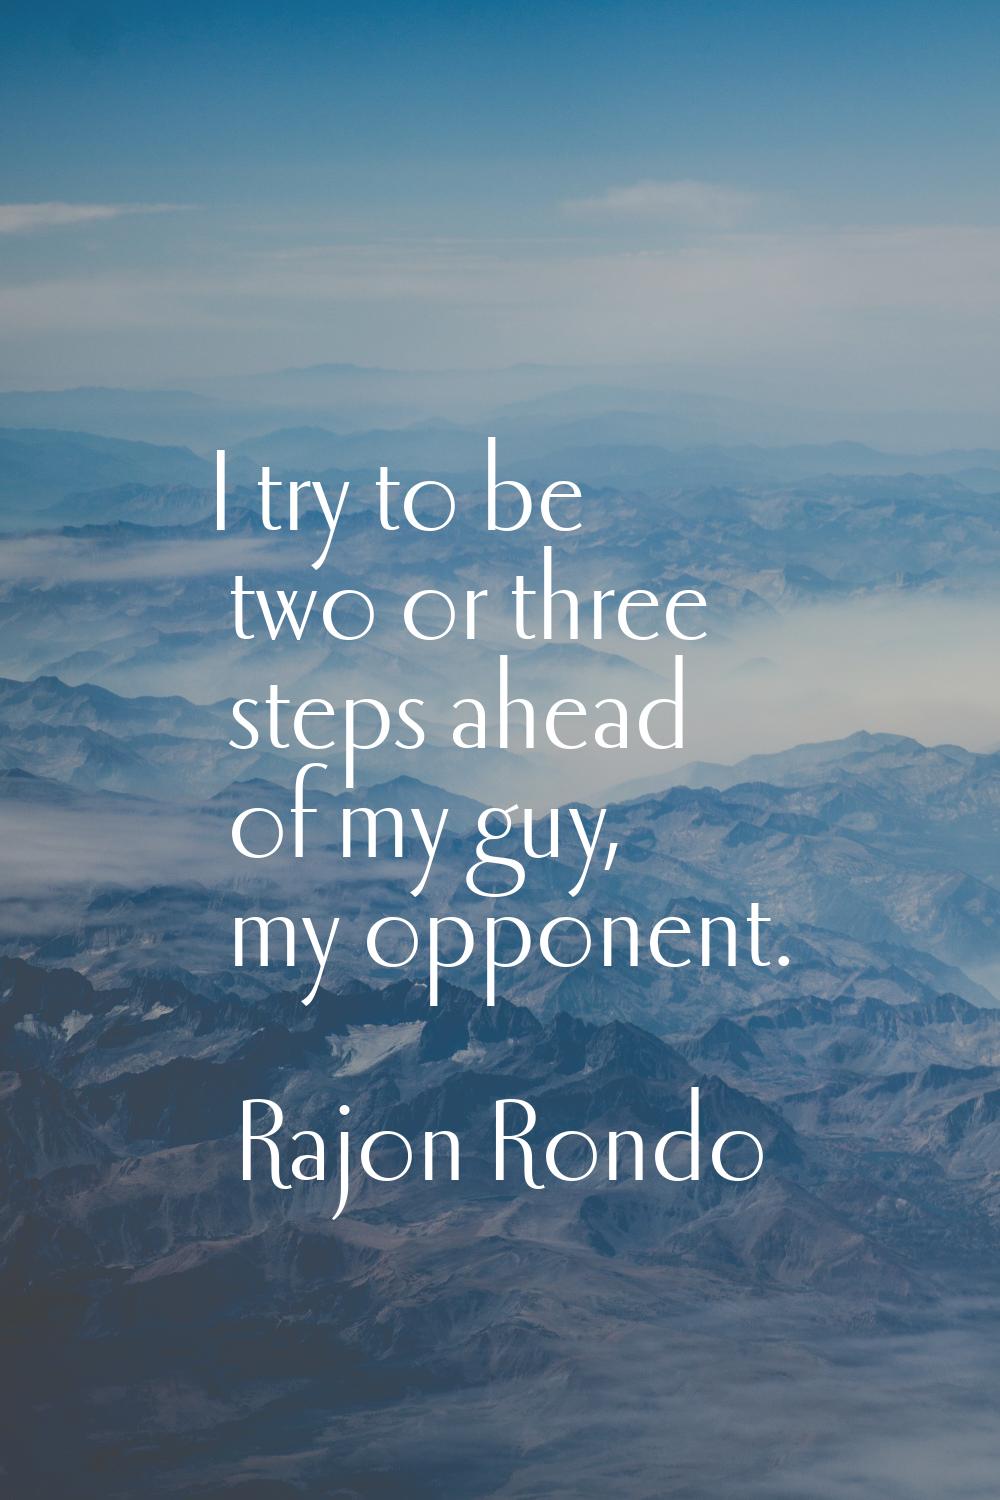 I try to be two or three steps ahead of my guy, my opponent.